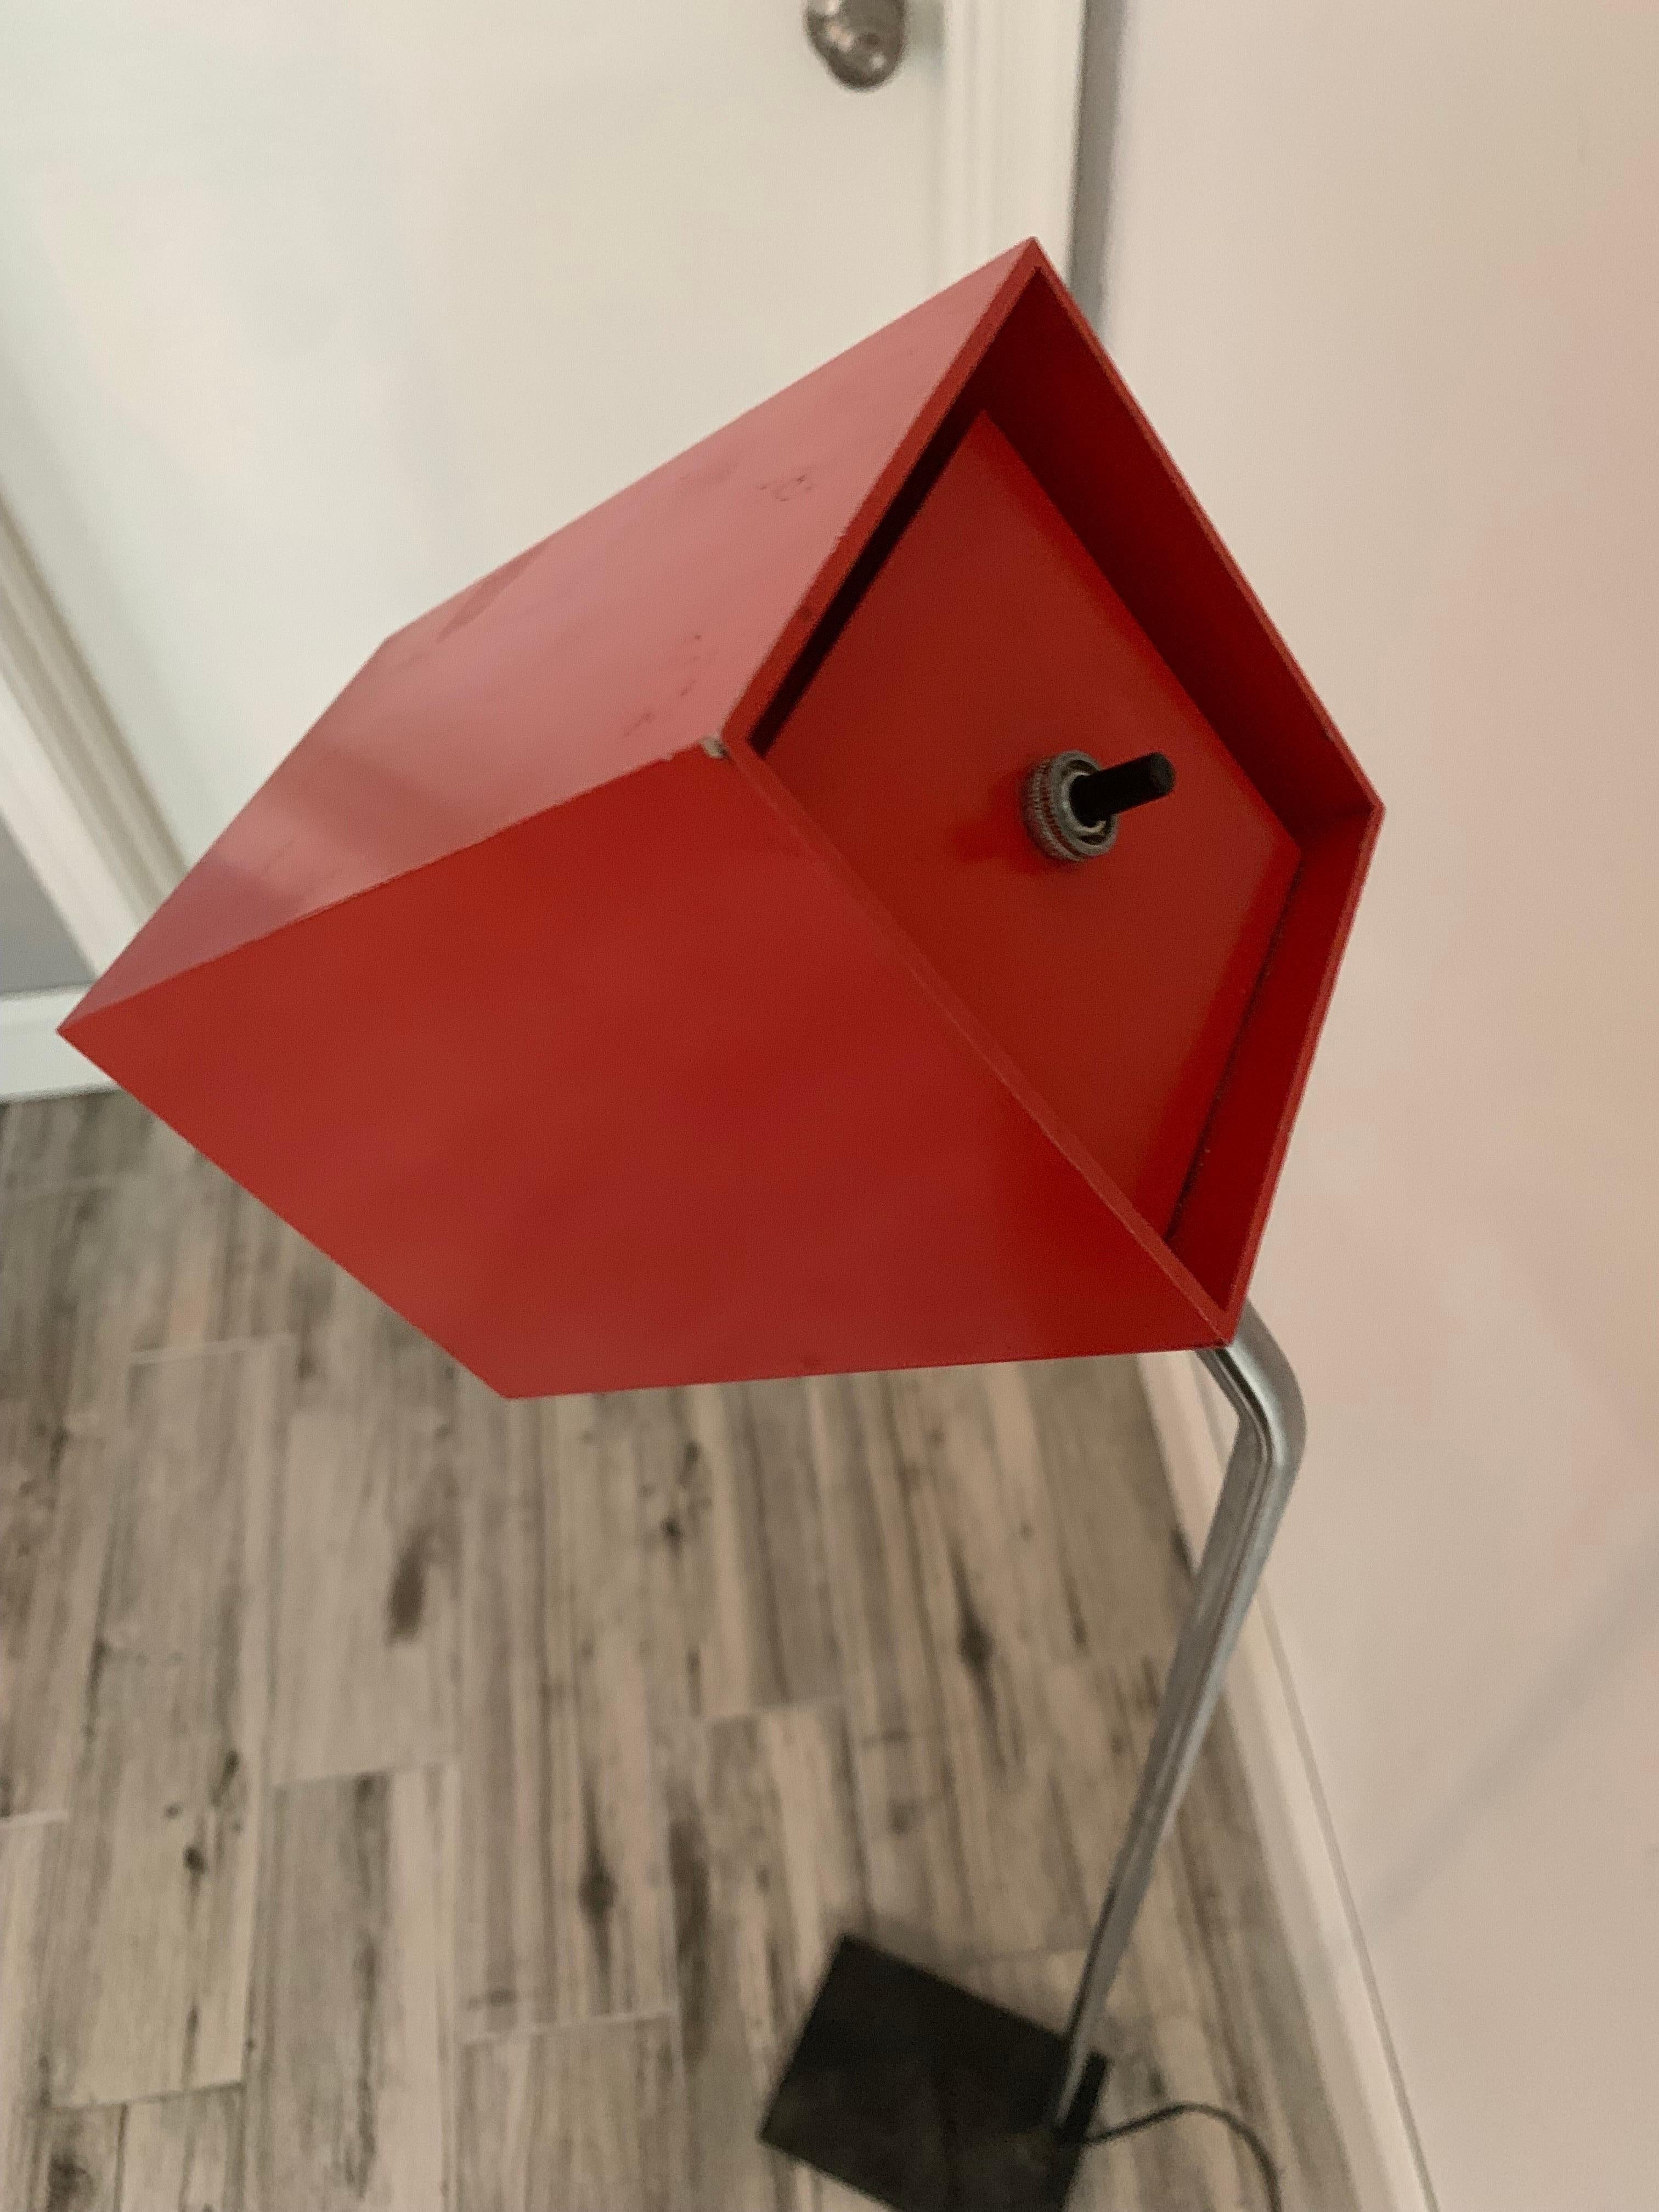 Sonneman for Kovacs Steel and Chrome Cubist Floor Lamp in Red, 1950s For Sale 2